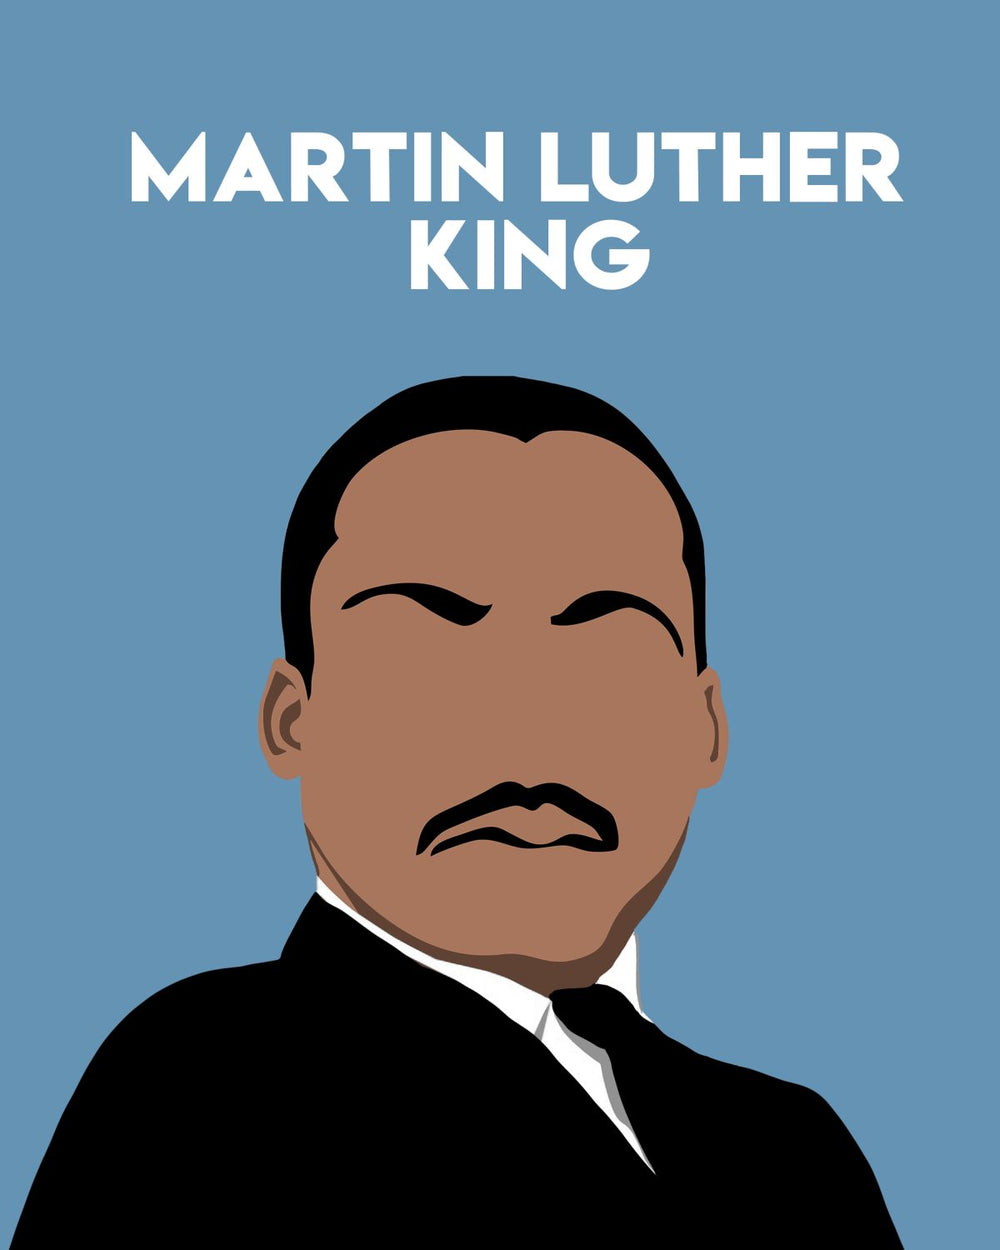 Renowned Martin Luther King